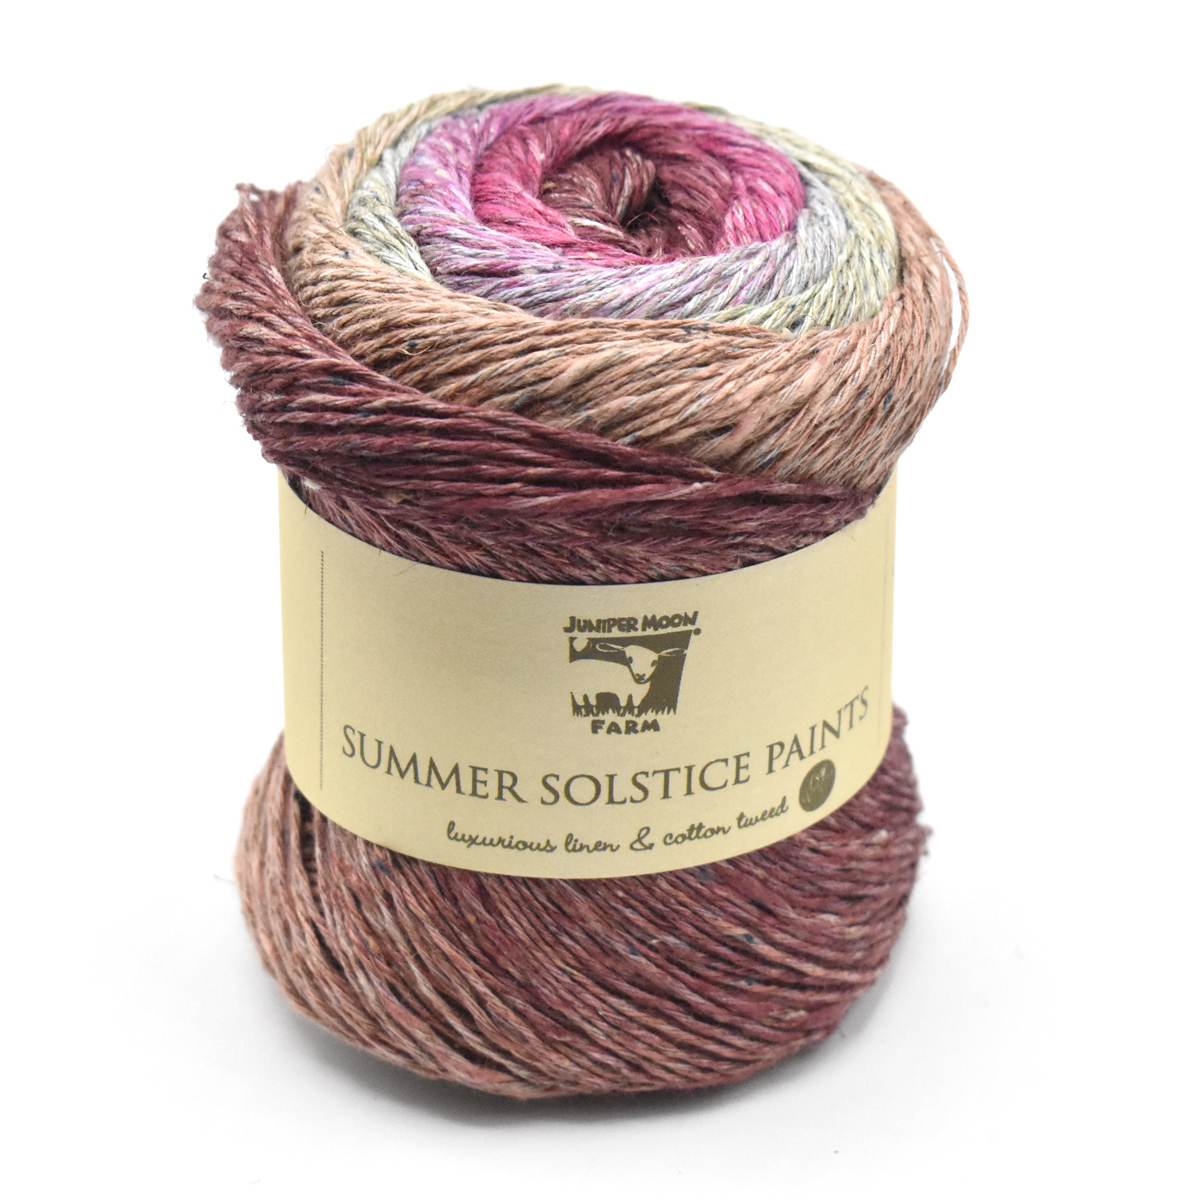 a skein of Summer Solstice Paints